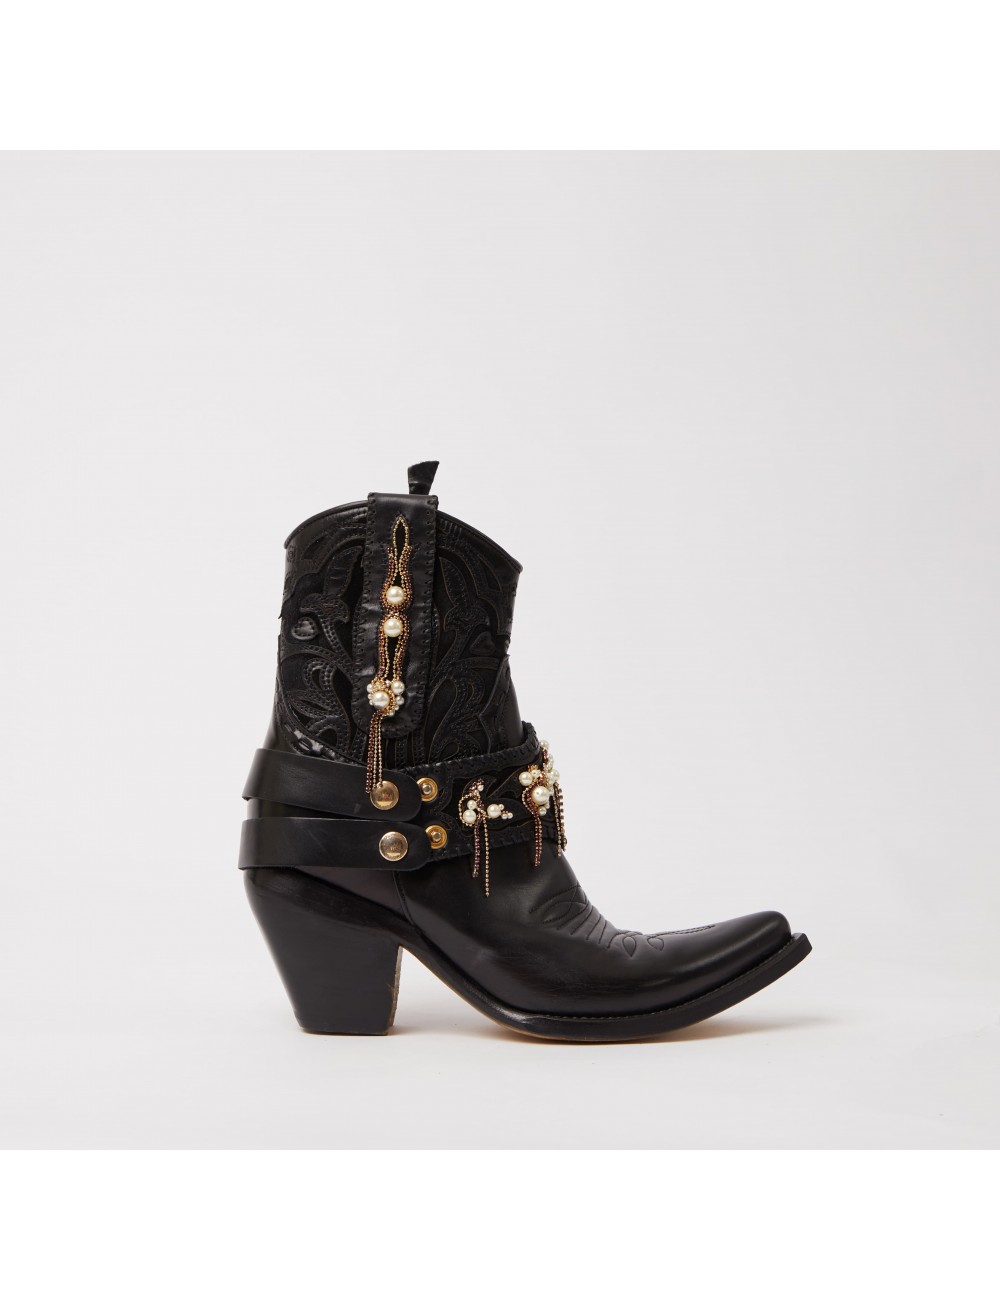 Women's cowboy boots with...